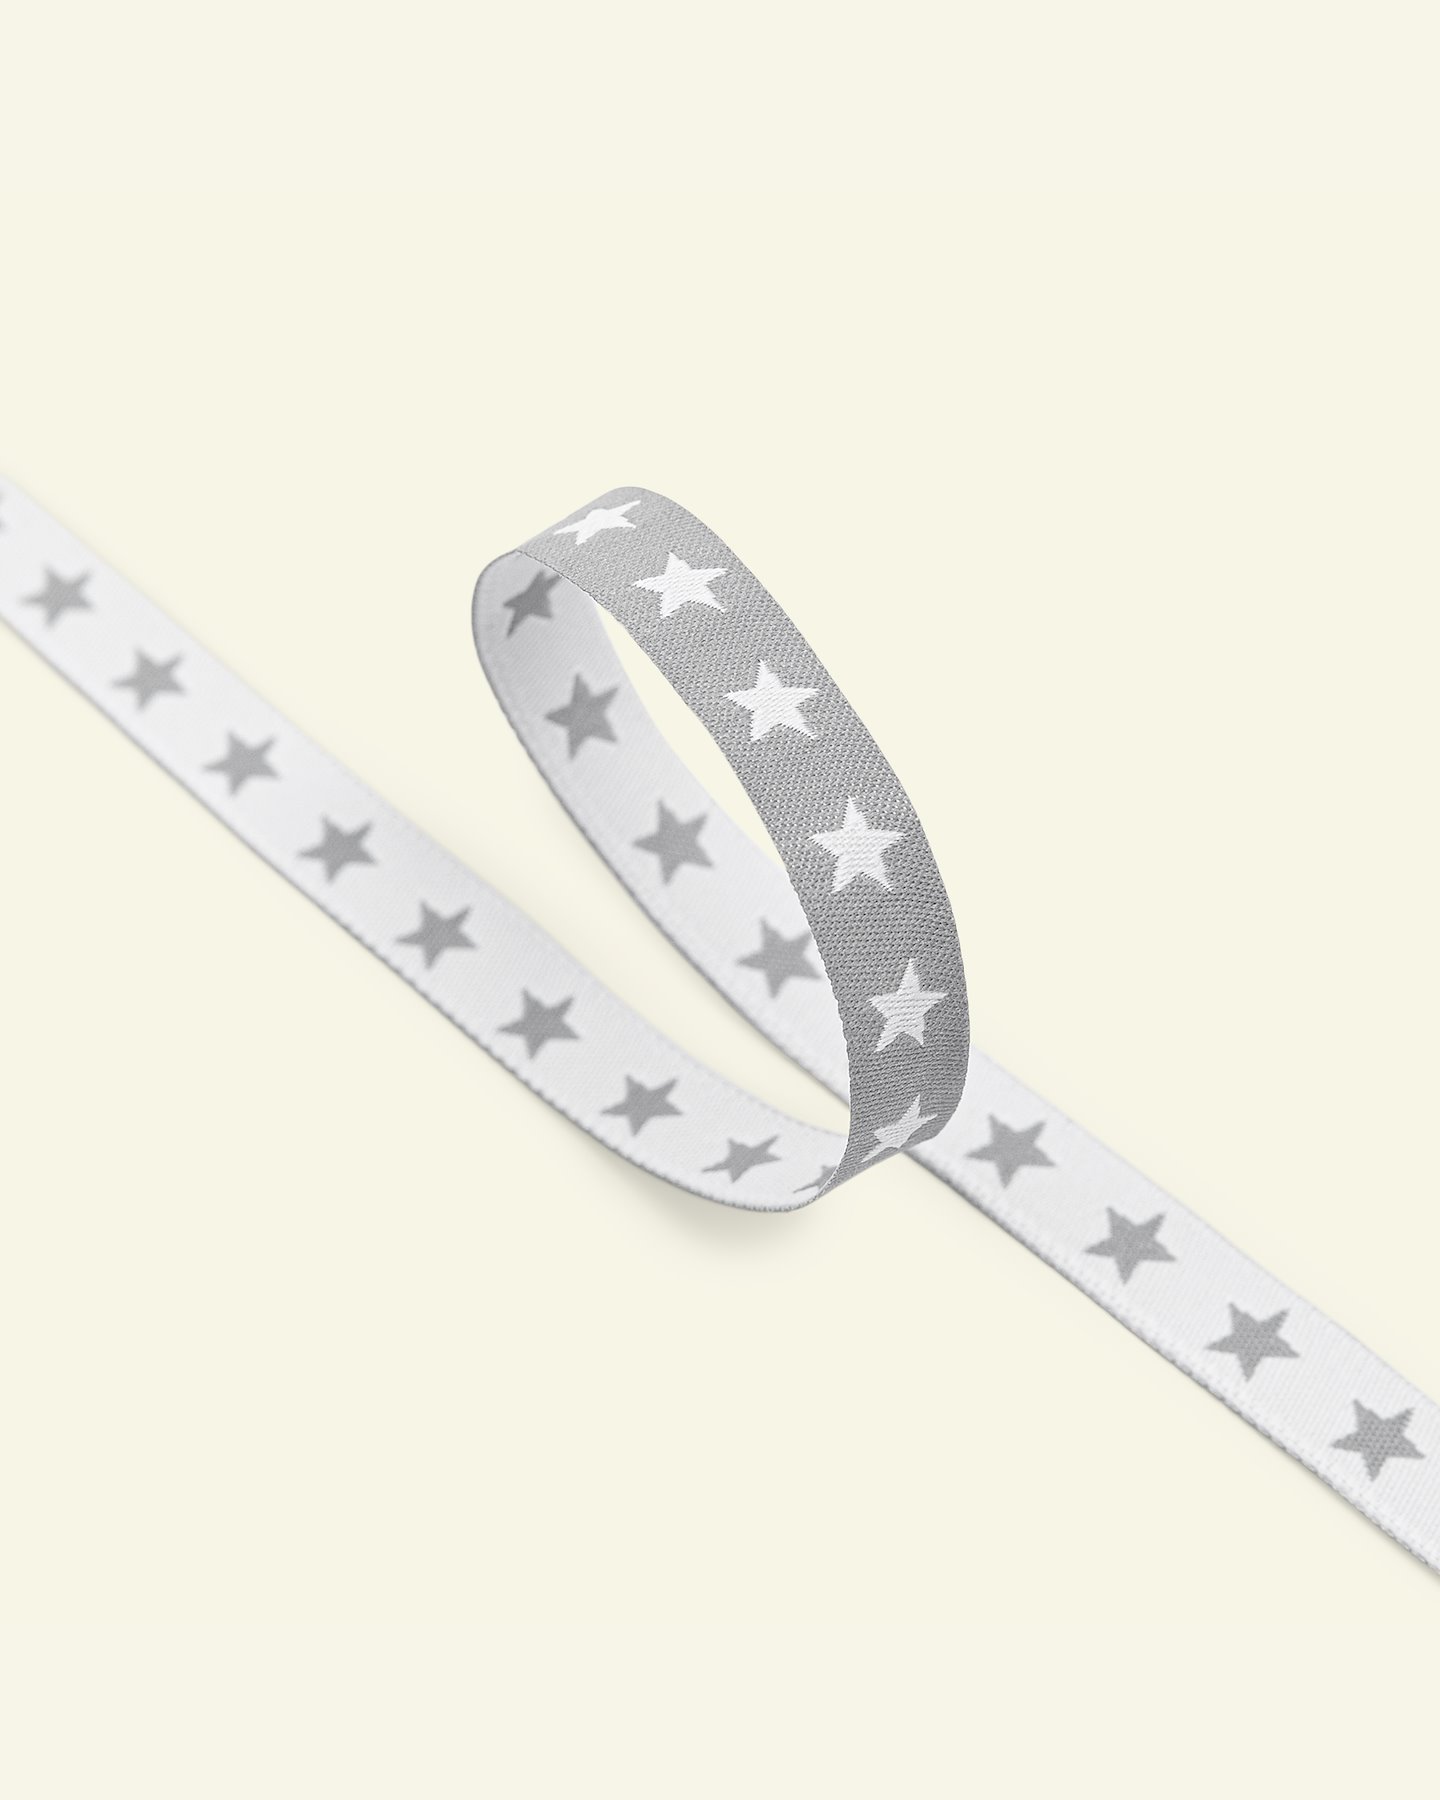 Ribbon woven 11mm star grey/white 3m 80127_pack.png